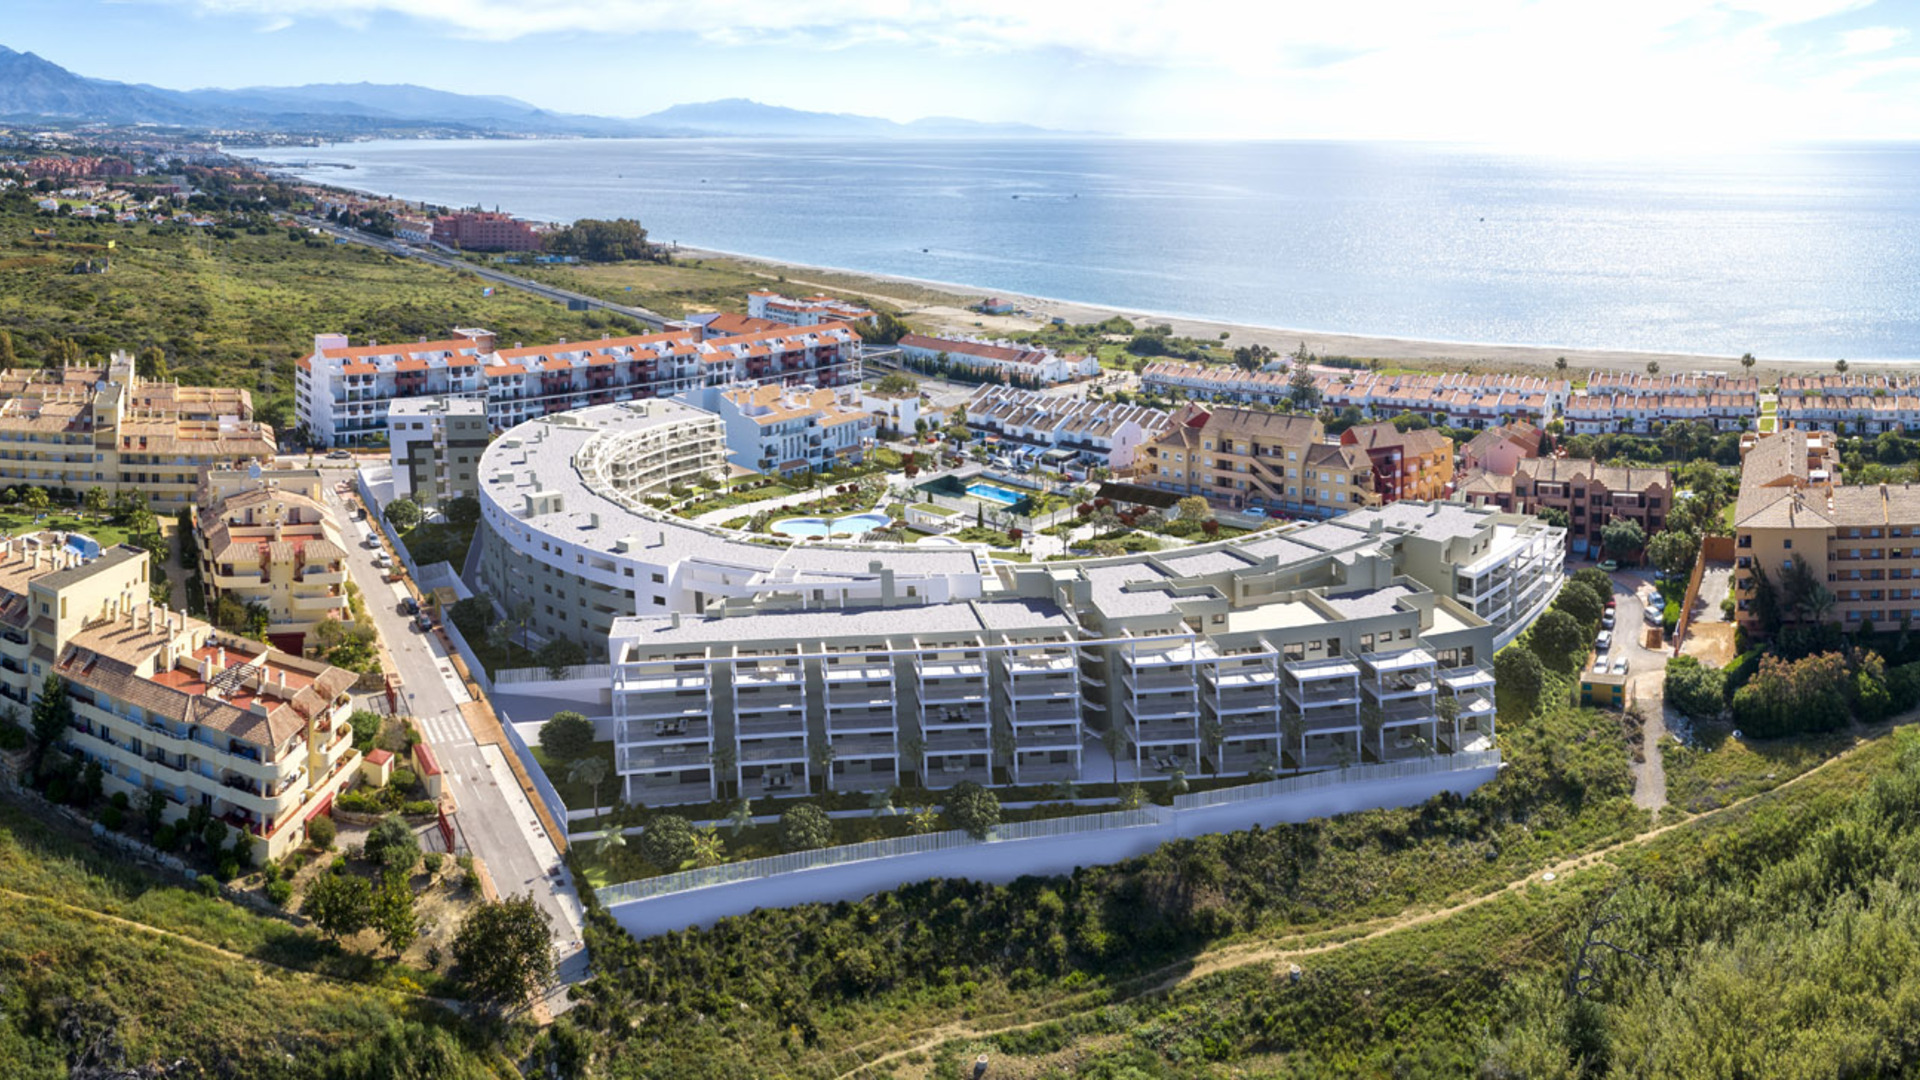 Apartments by the beach in La Duquesa